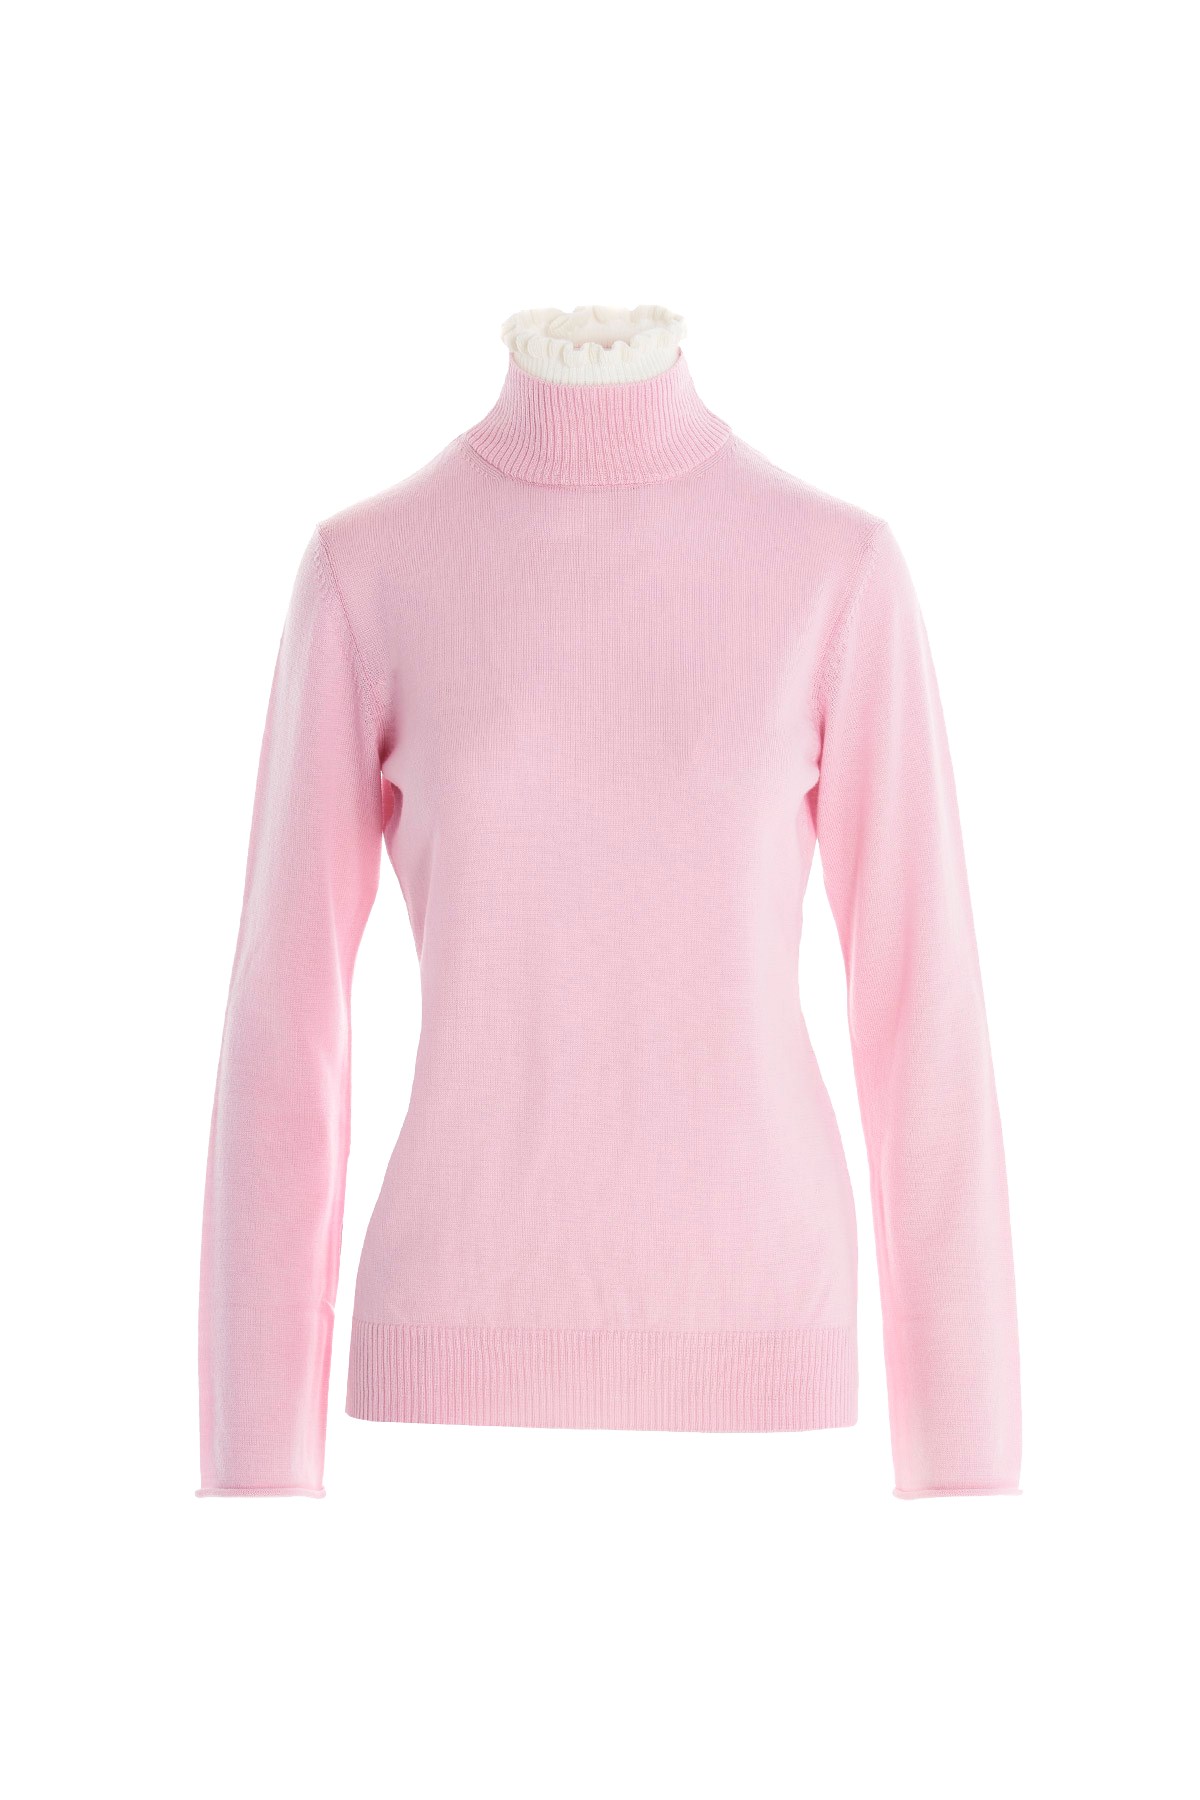 UNDERCOVER Double Collar Sweater